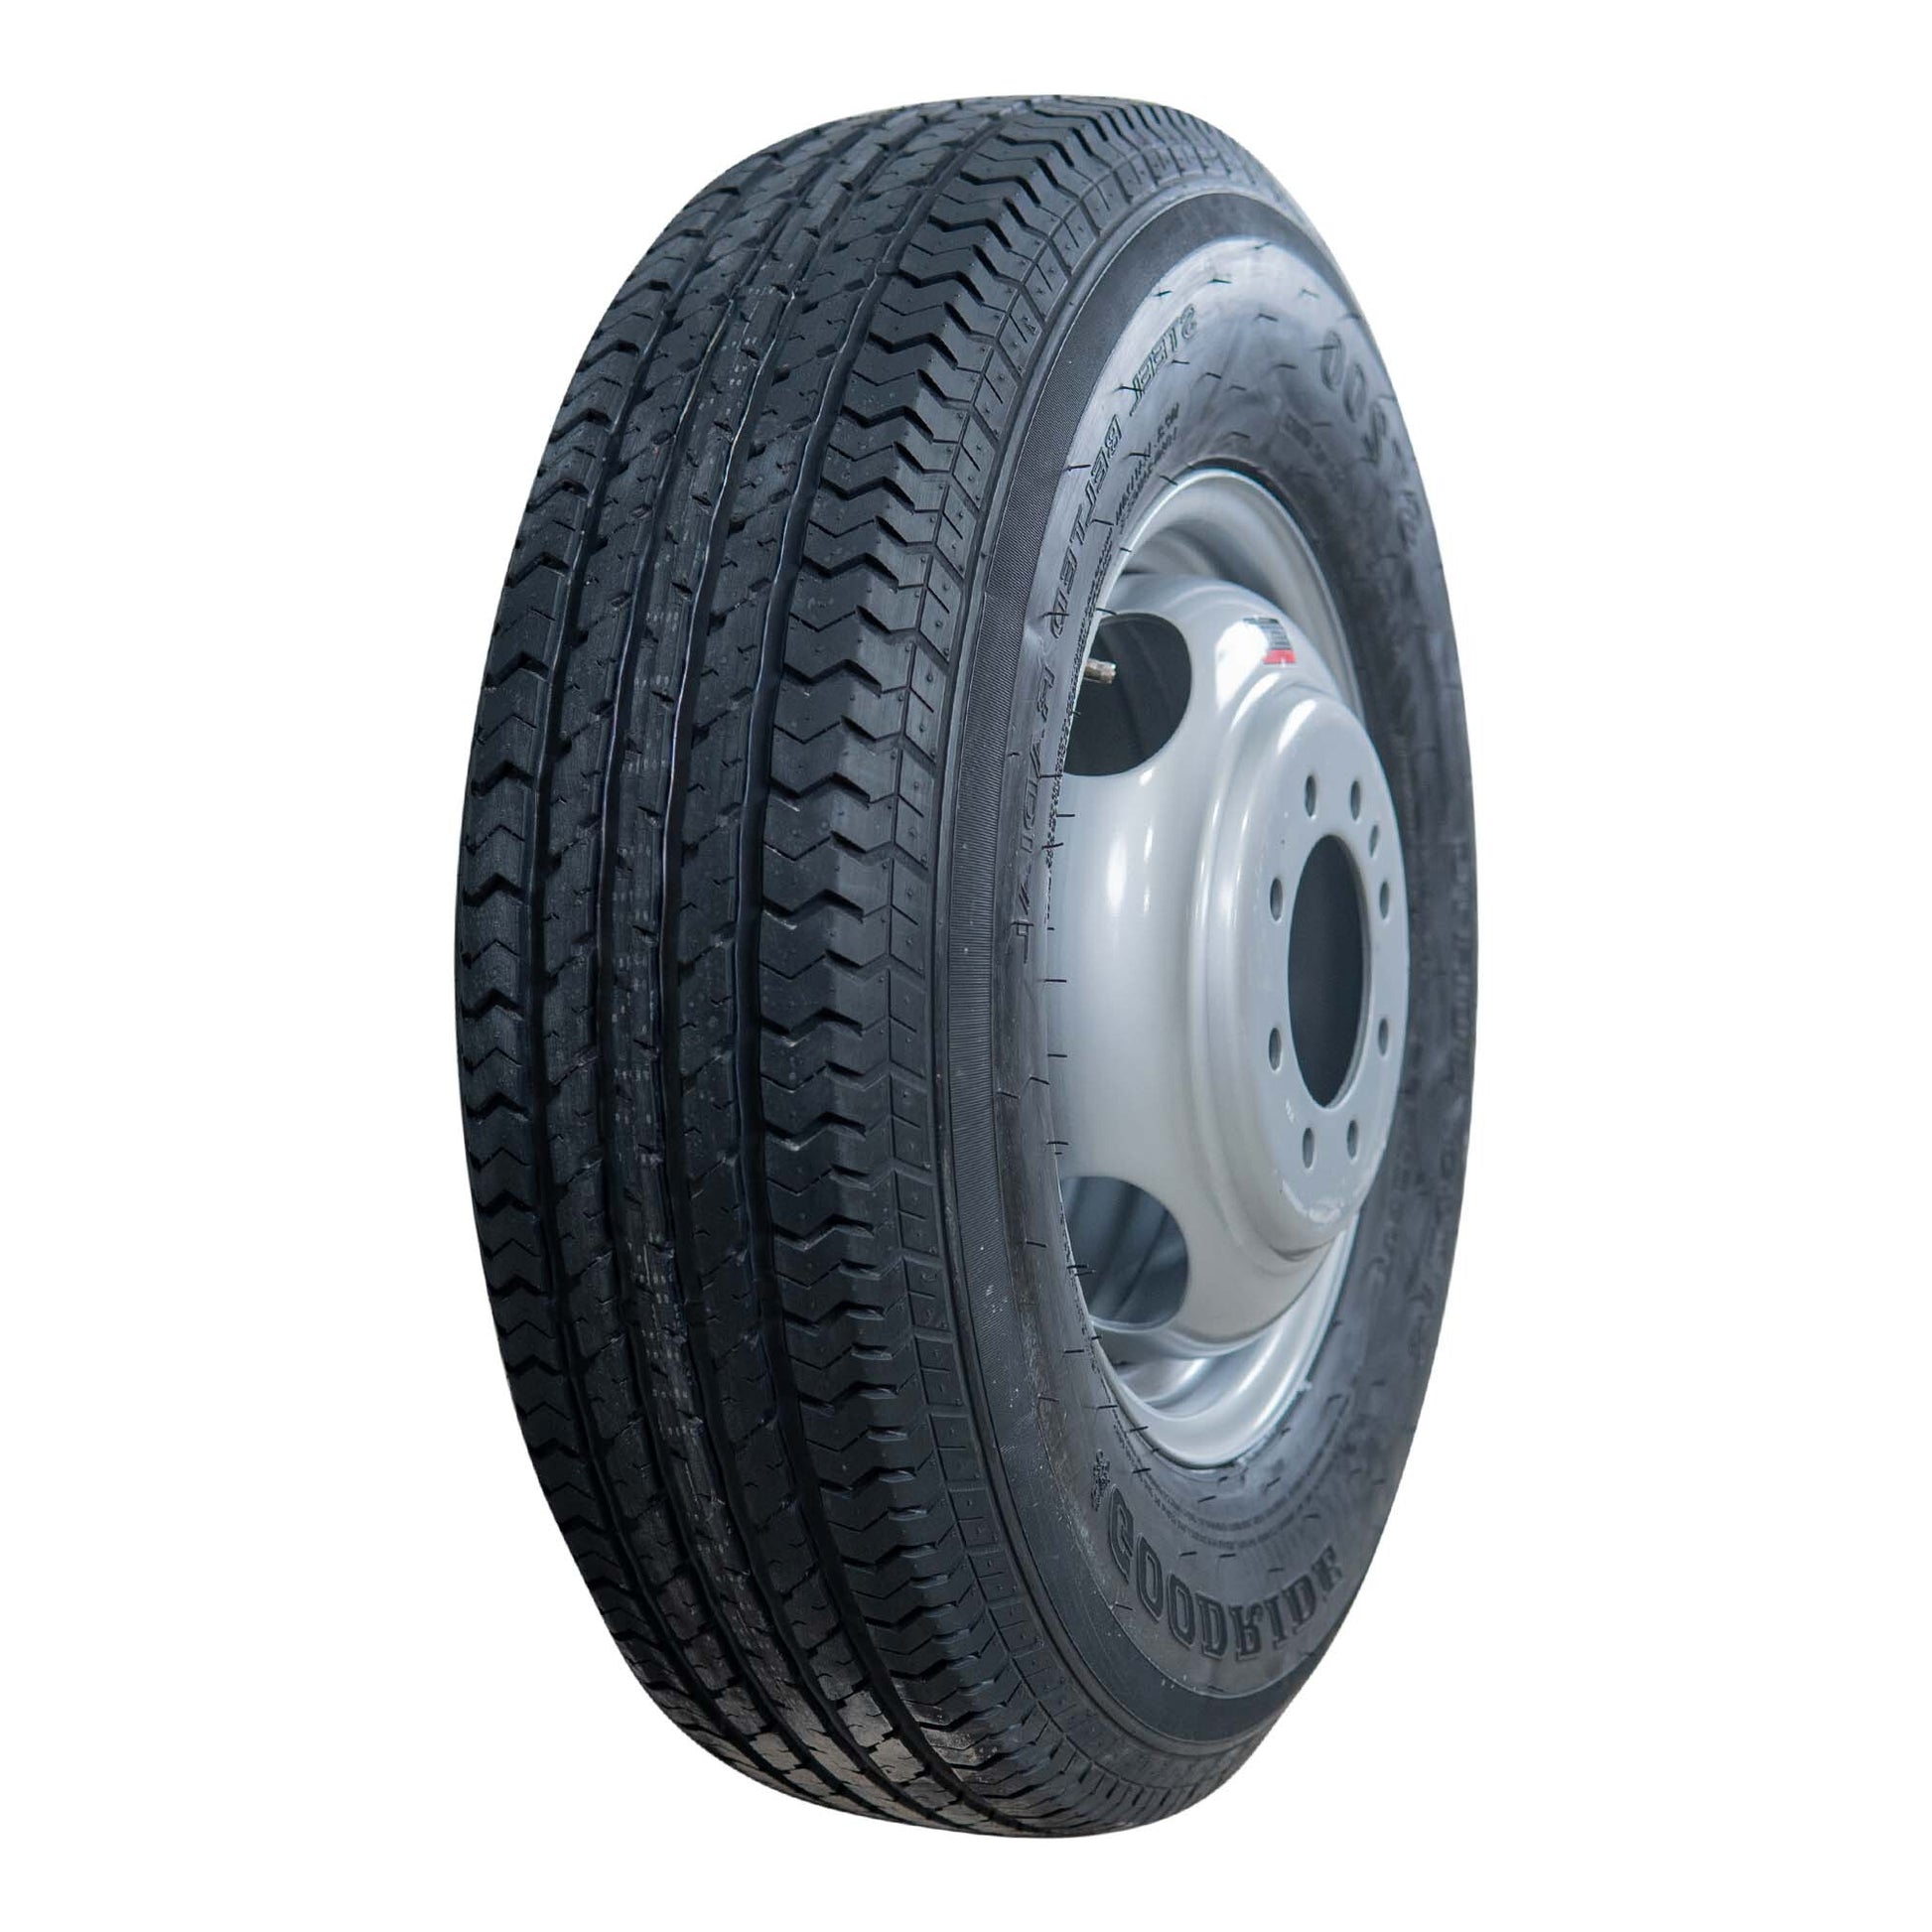 Goodride 16" 10 ply Radial Trailer Tire & Wheel - ST 235/80 R16 8 lug Dual - The Trailer Parts Outlet